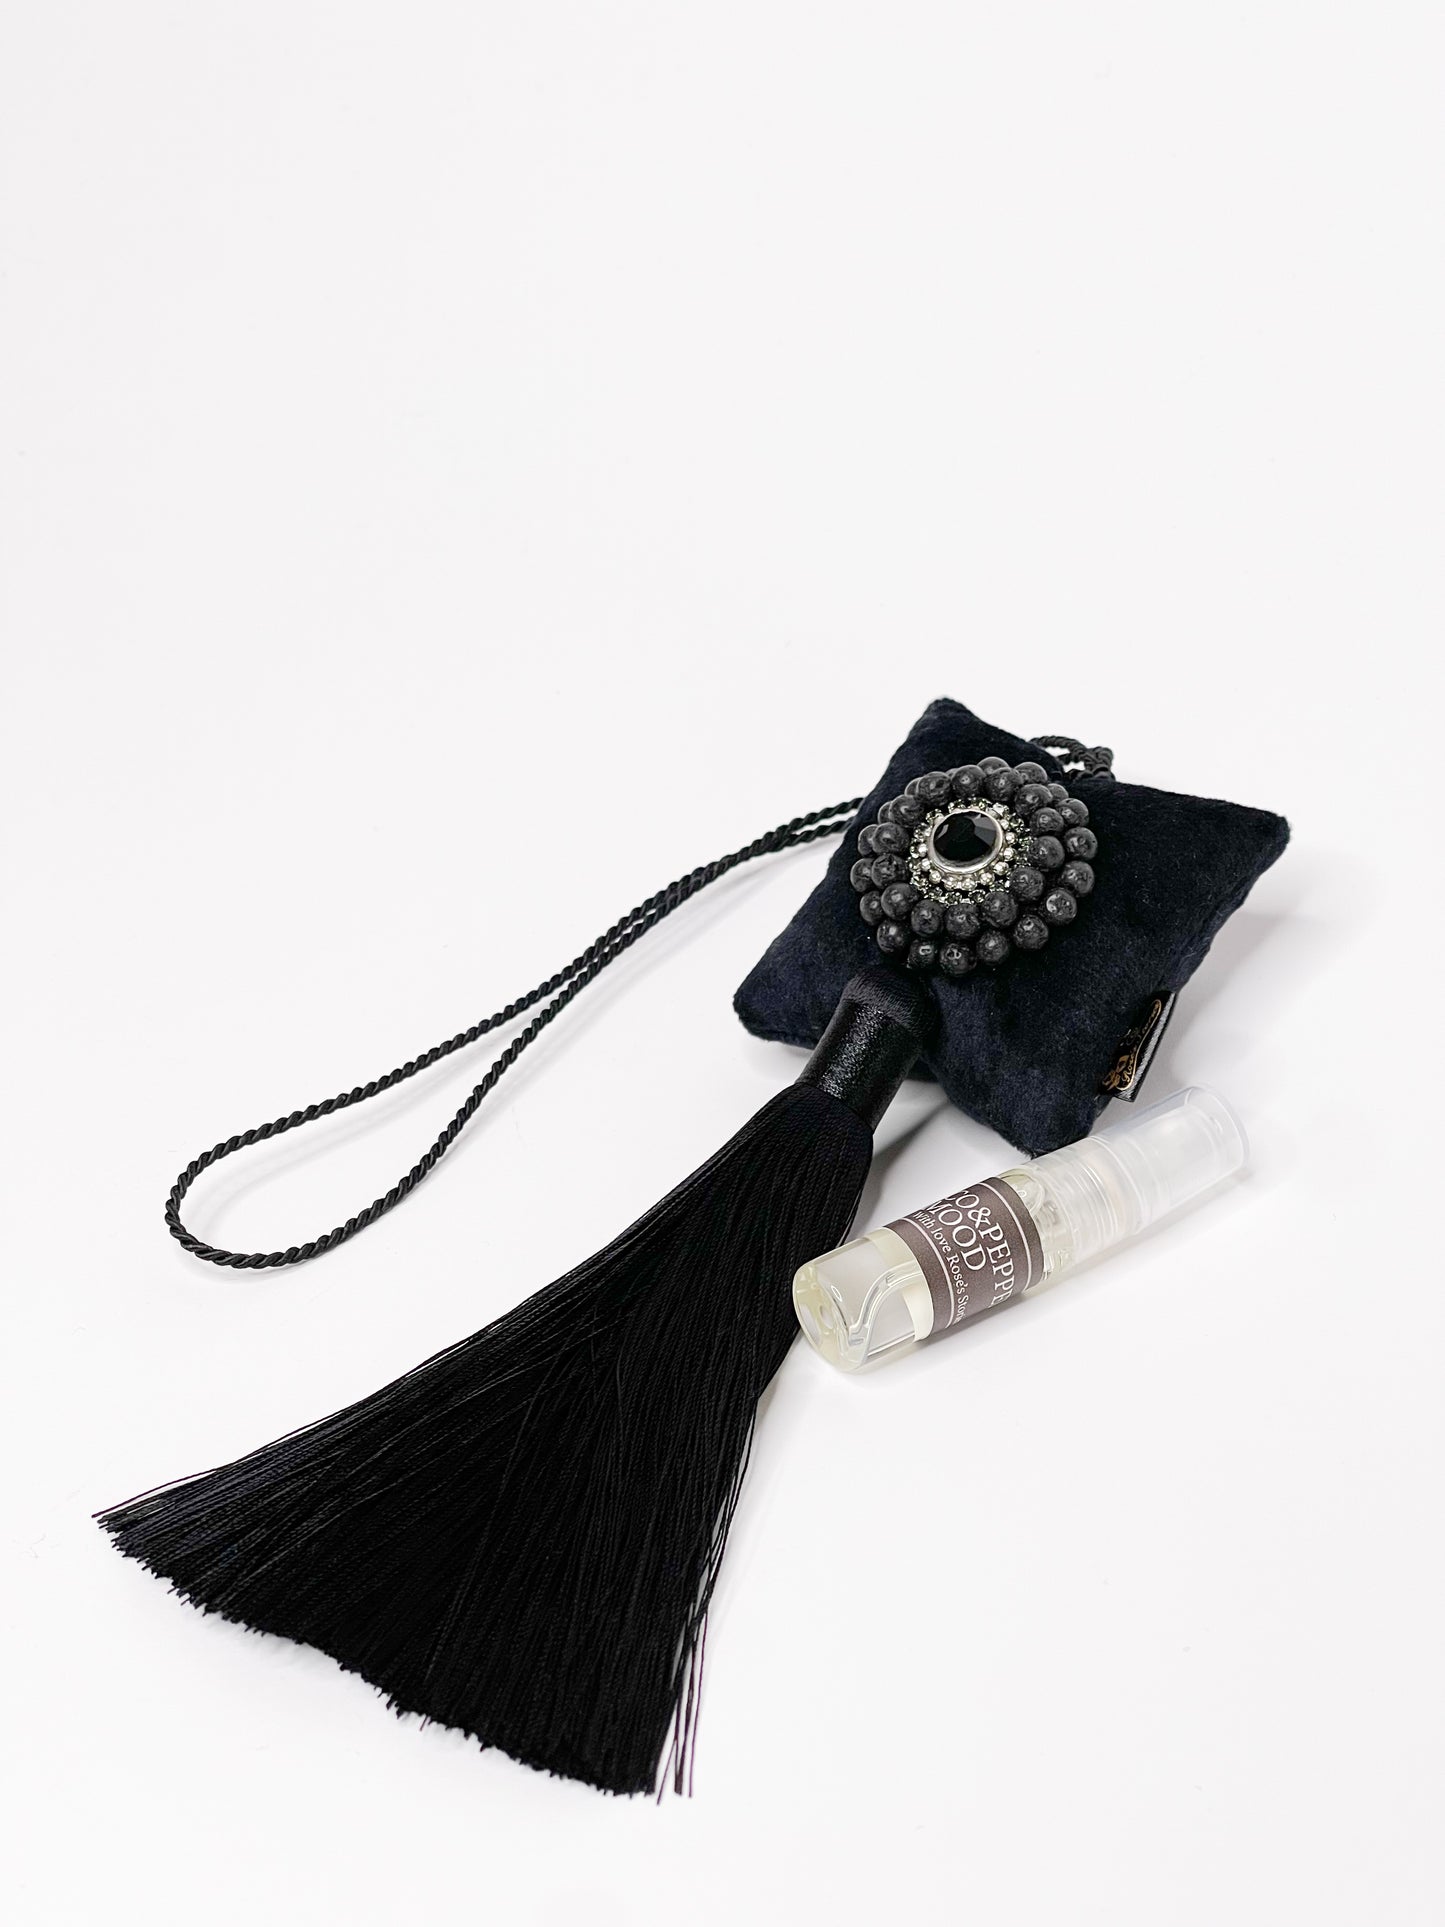 Hanging fragrance with Lava stone and long tassel.